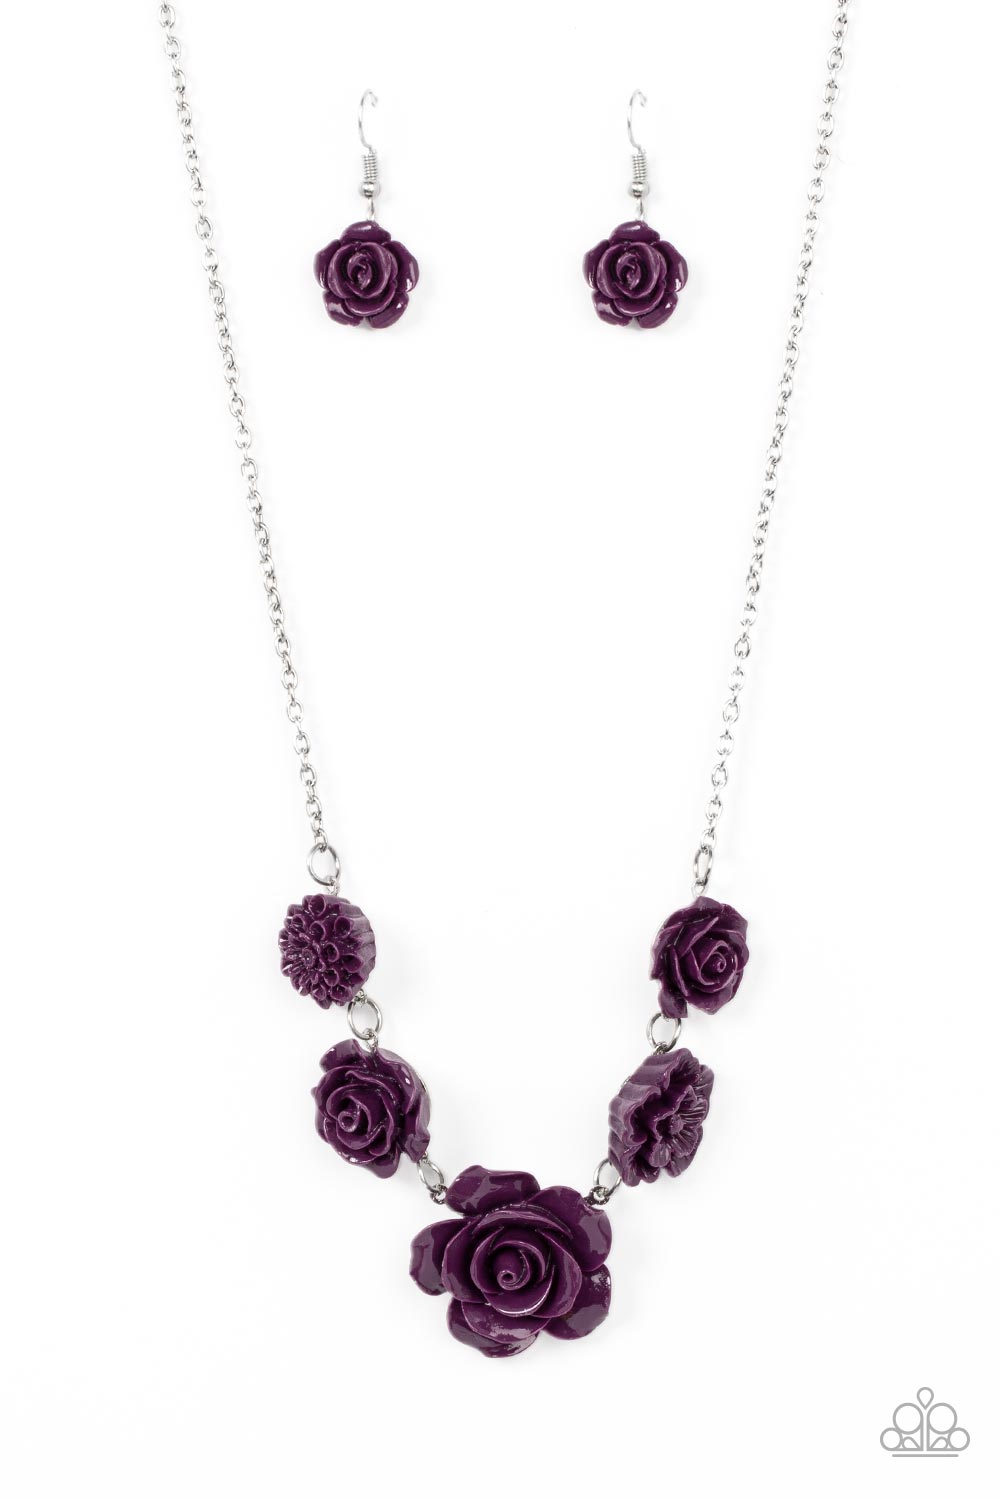 PRIMROSE and Pretty Purple Flower Necklace - Paparazzi Accessories- lightbox - CarasShop.com - $5 Jewelry by Cara Jewels